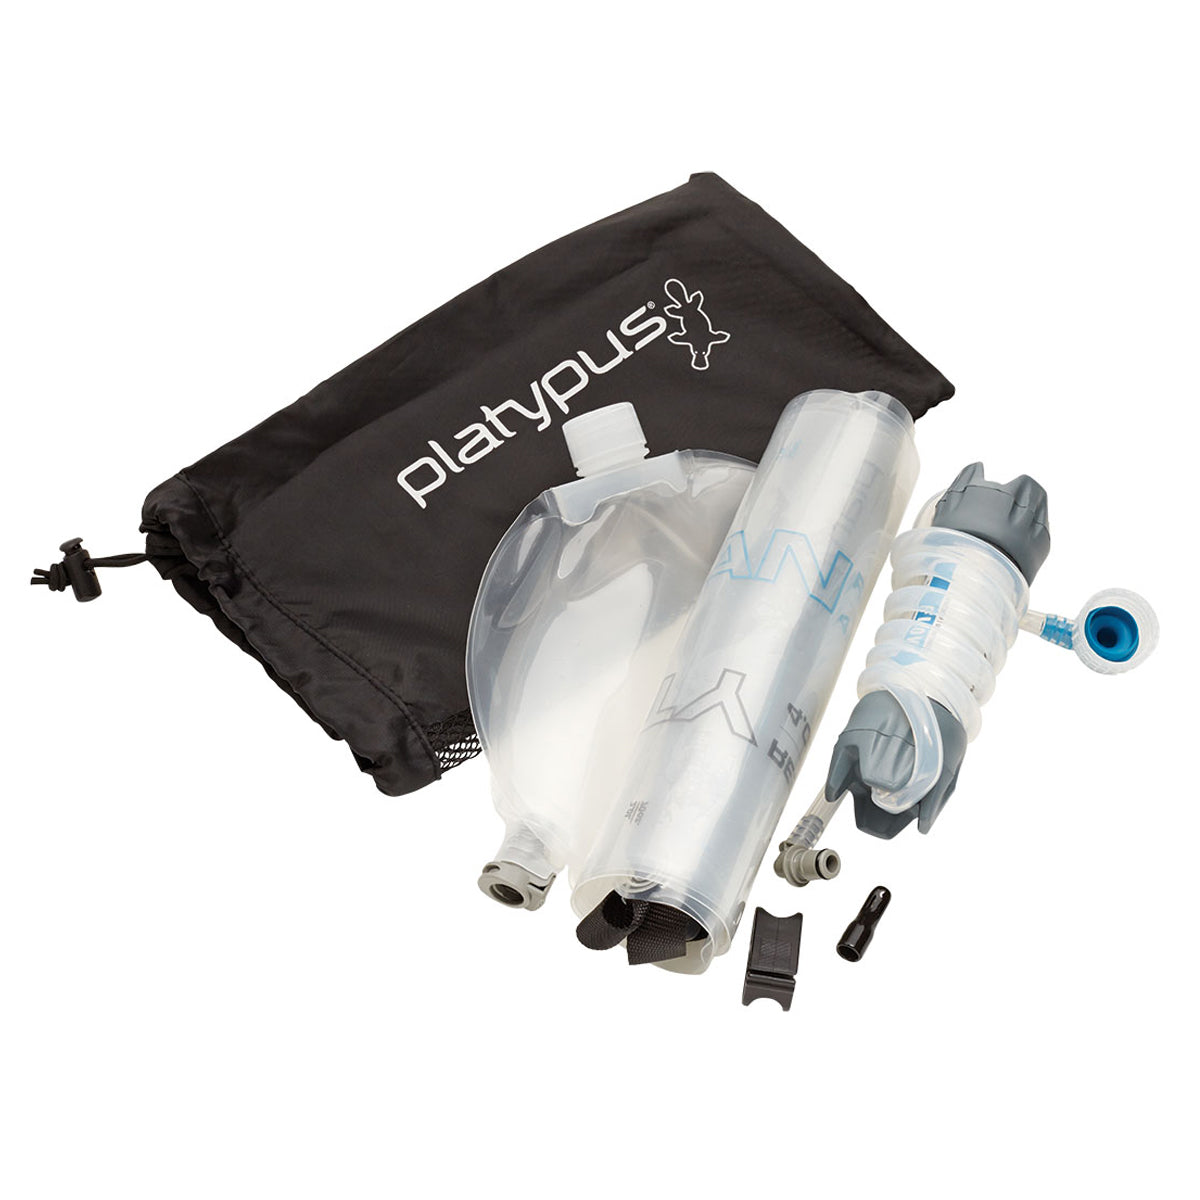 Platypus GravityWorks 4L Water Filter System in Platypus GravityWorks 4L Water Filter System by Platypus | Camping - goHUNT Shop by GOHUNT | Platypus - GOHUNT Shop